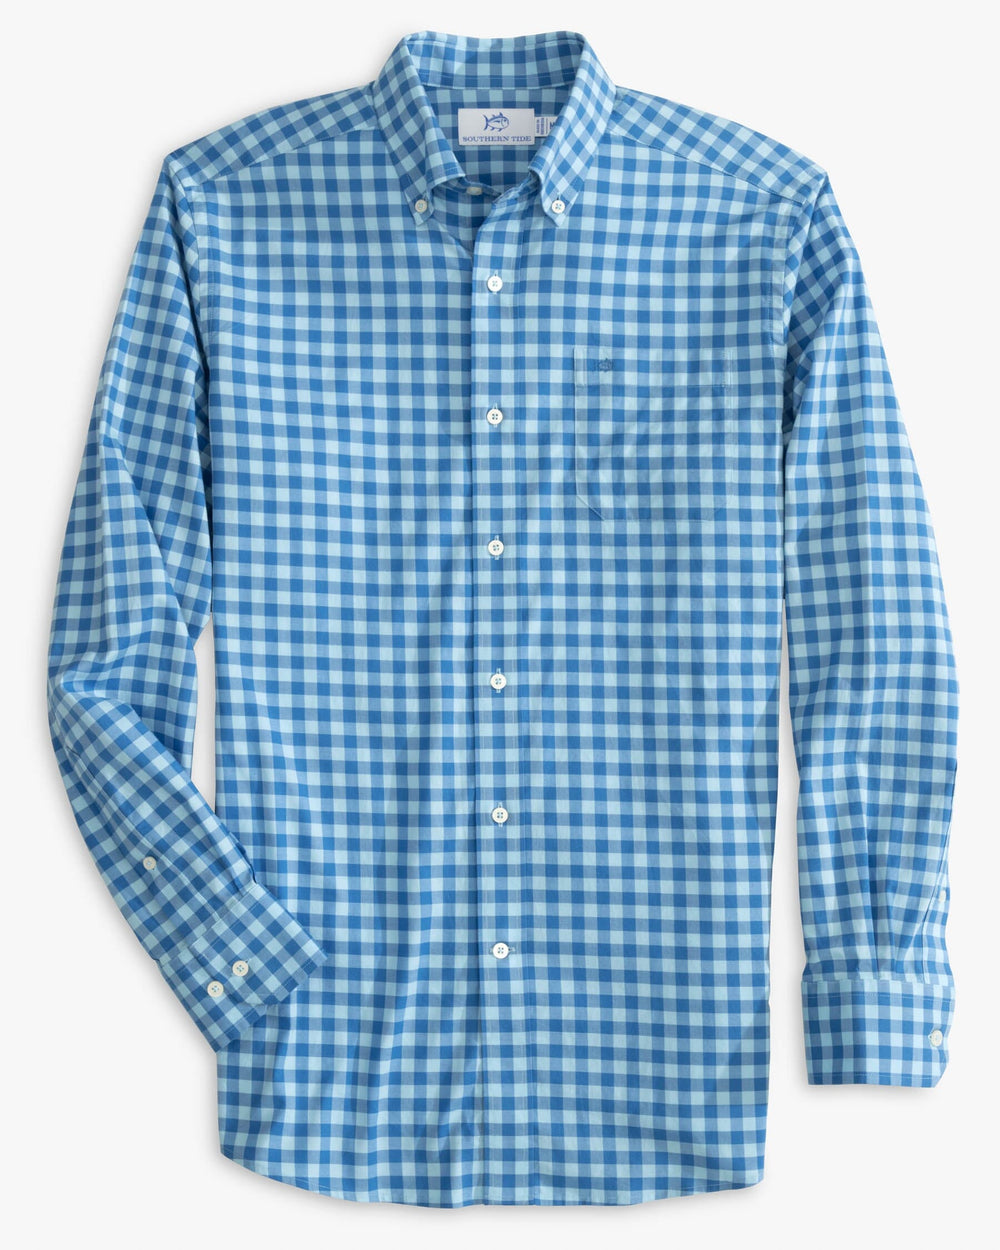 The front view of the Southern Tide Skipjack Lautner Gingham Intercoastal Sport Shirt by Southern Tide - Rain Water